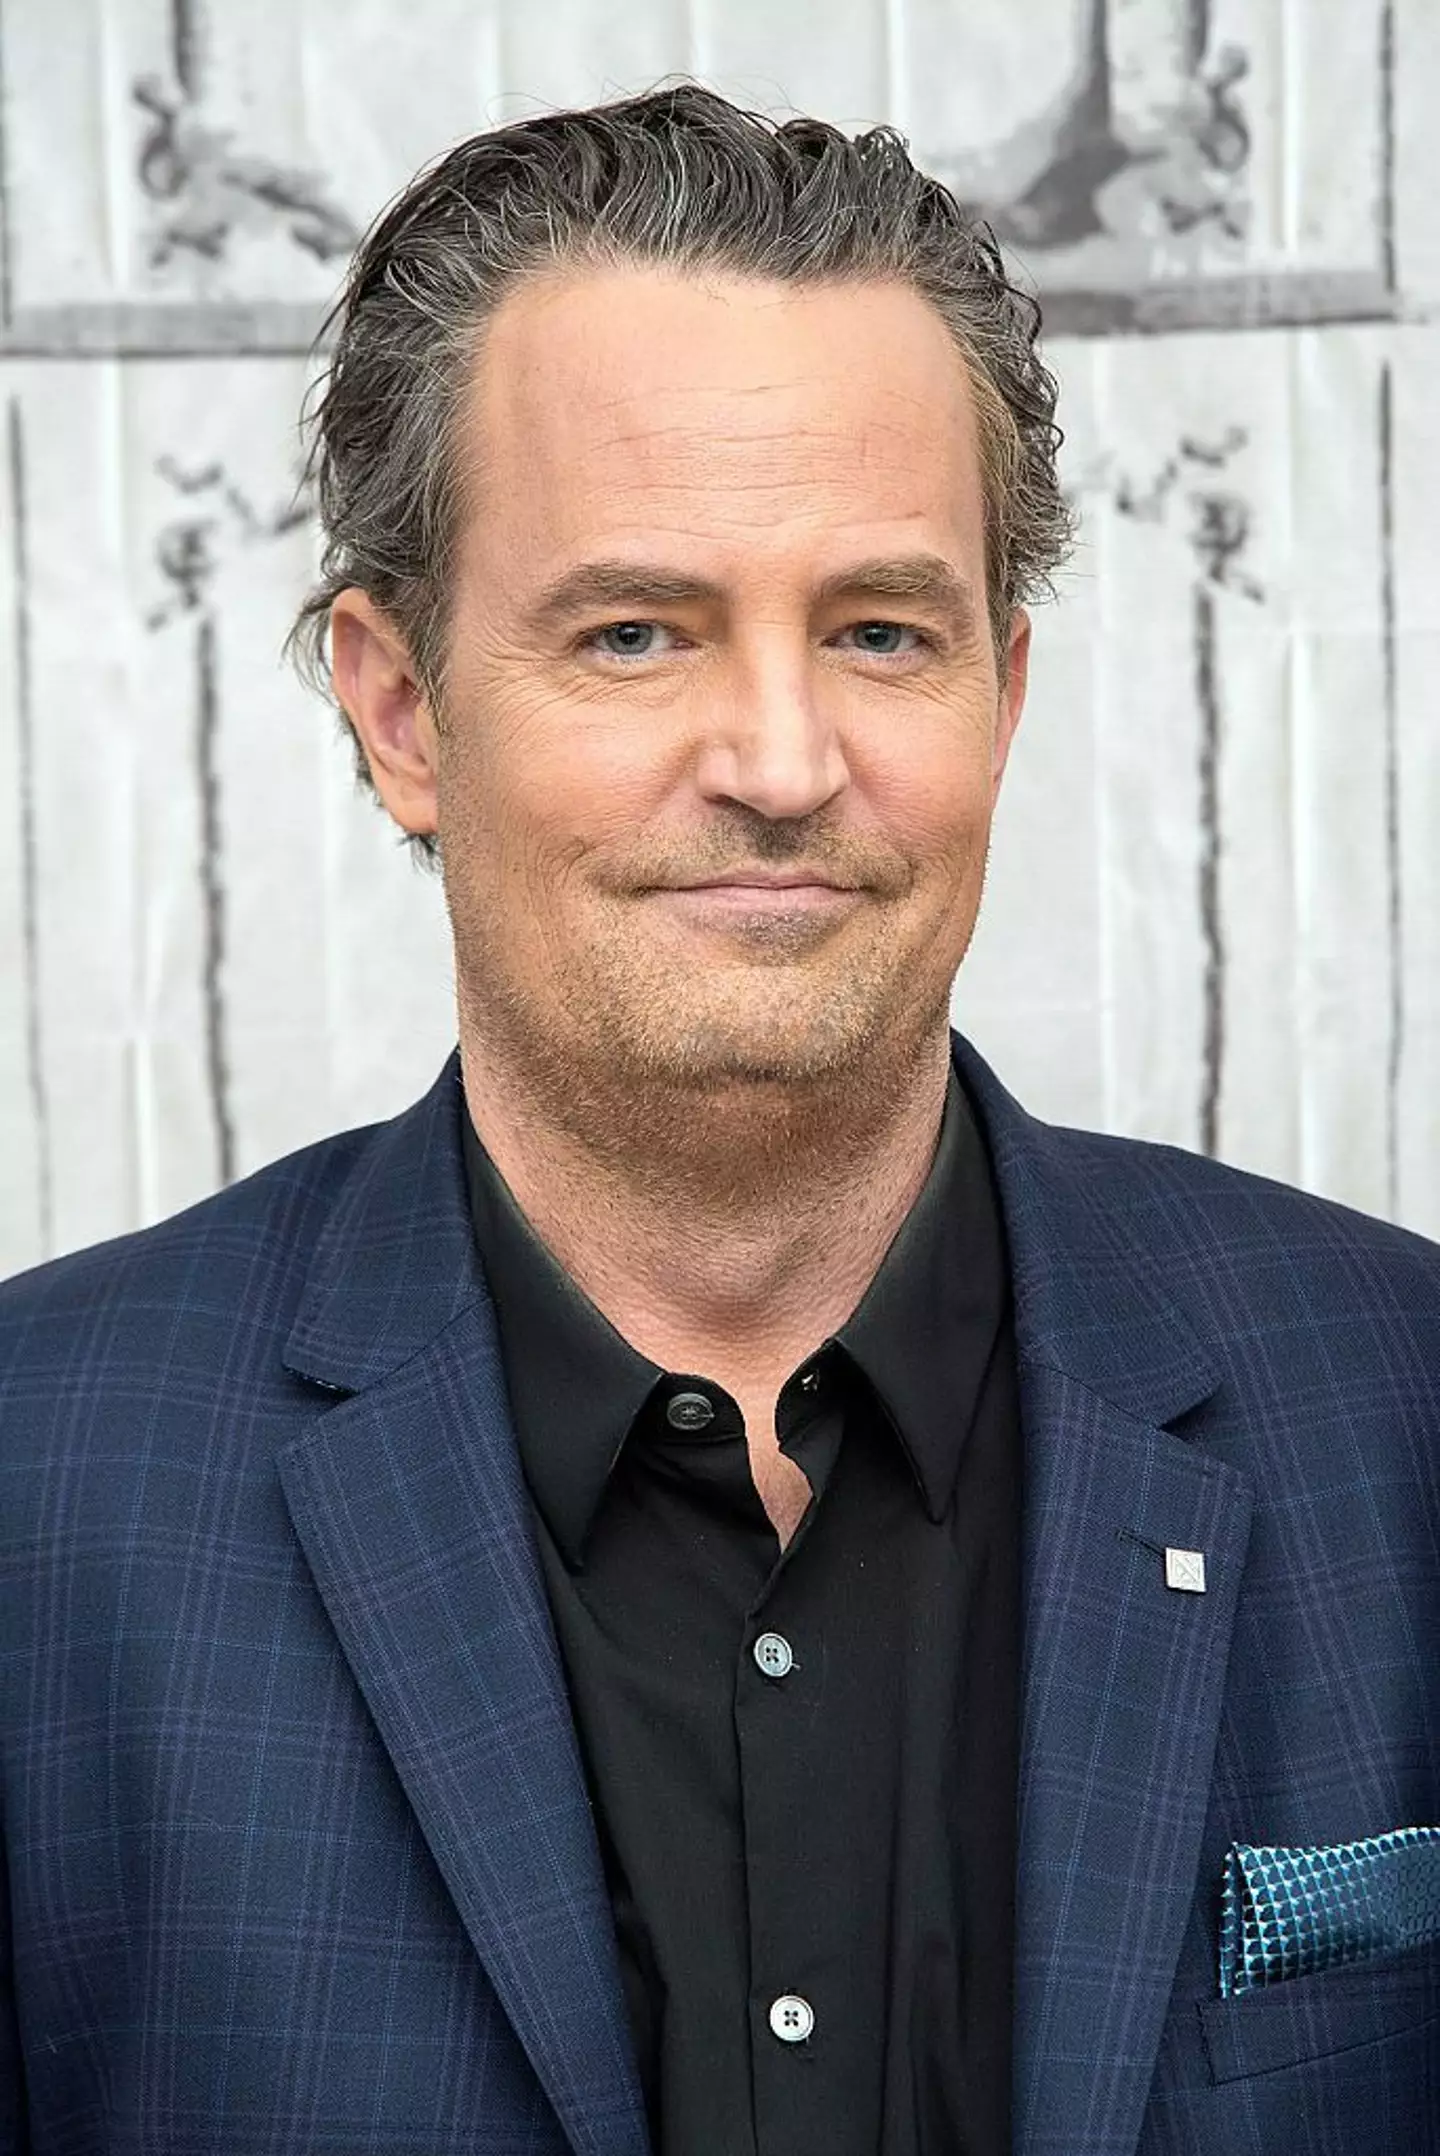 Matthew Perry's death was ruled as an accident by the authorities.